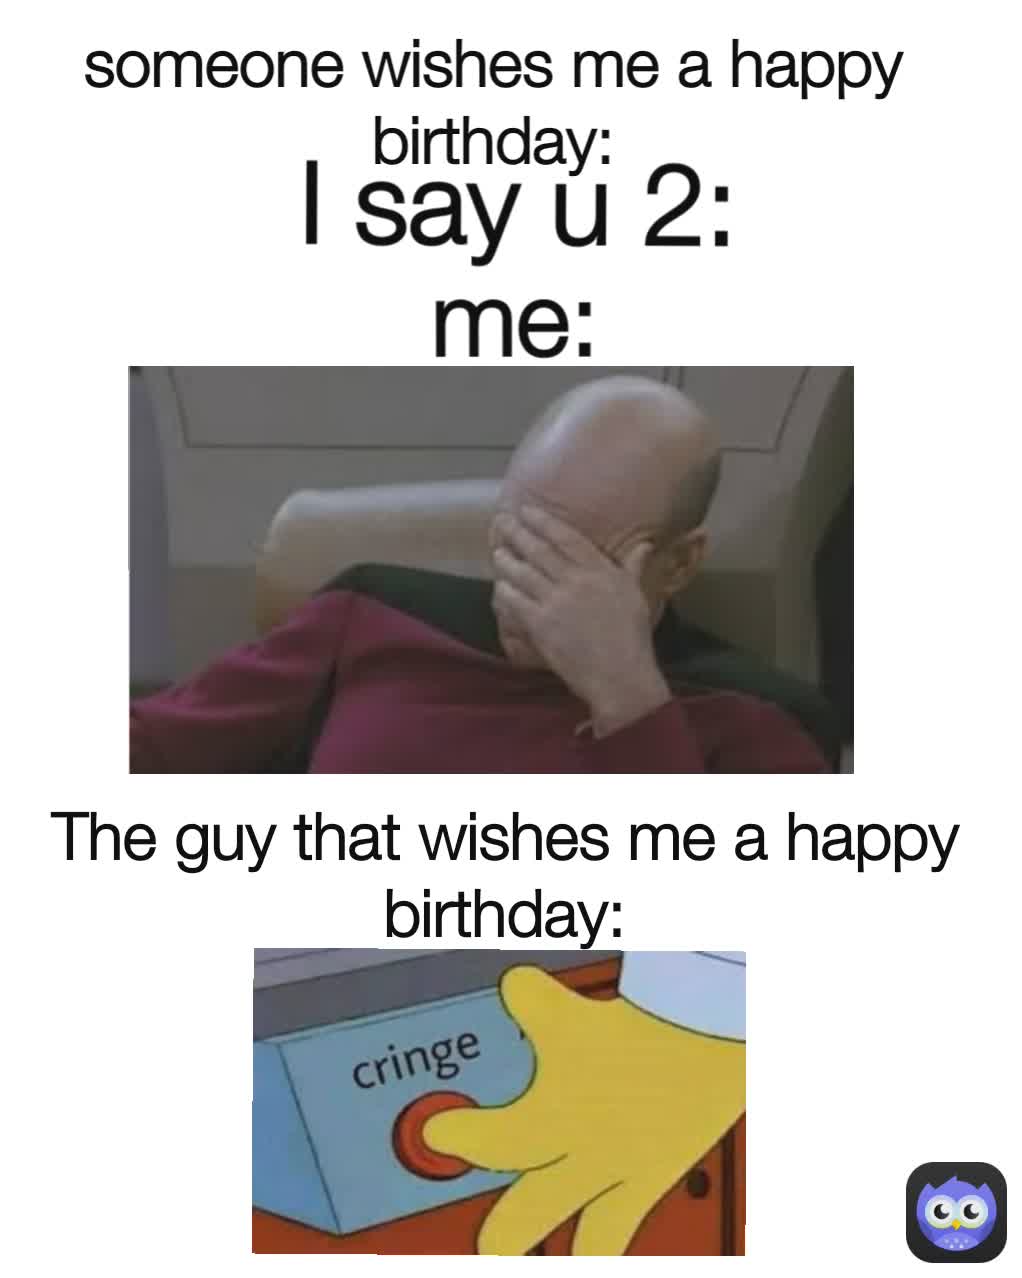 I say u 2: The guy that wishes me a happy birthday: someone wishes me a happy birthday: me: